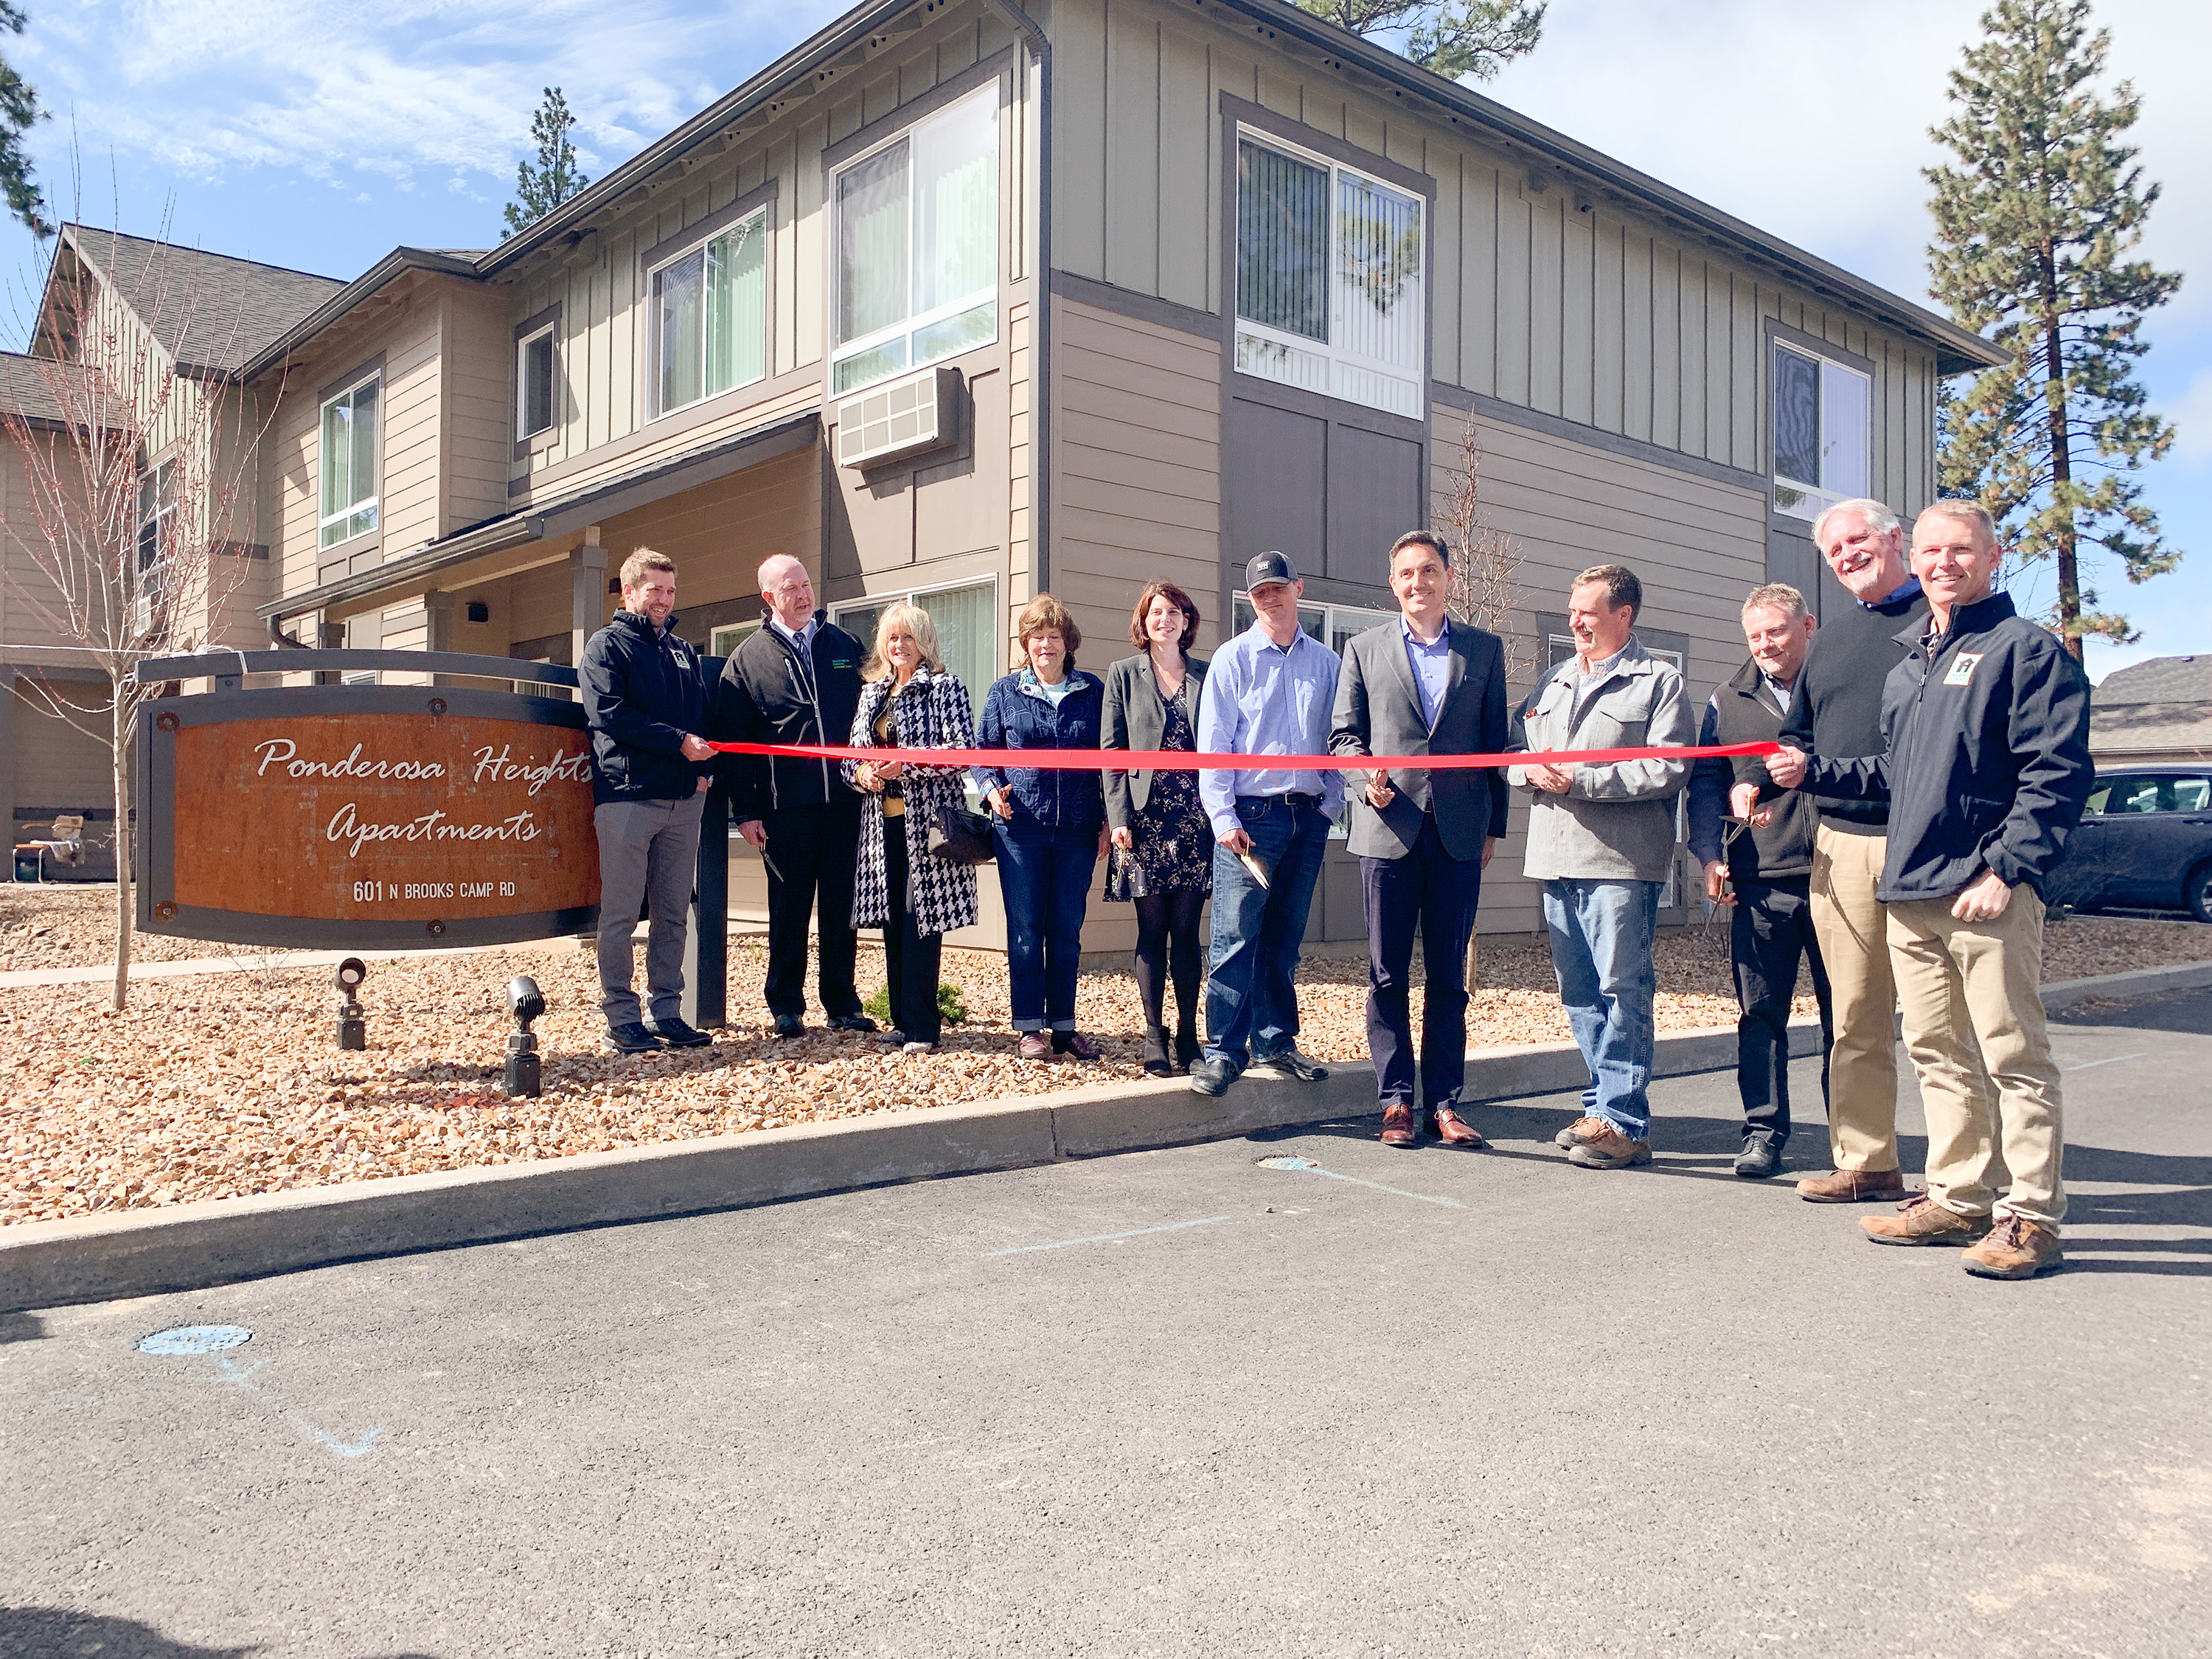 Celebrating open house for Ponderosa Heights apartments in Sisters, Oregon